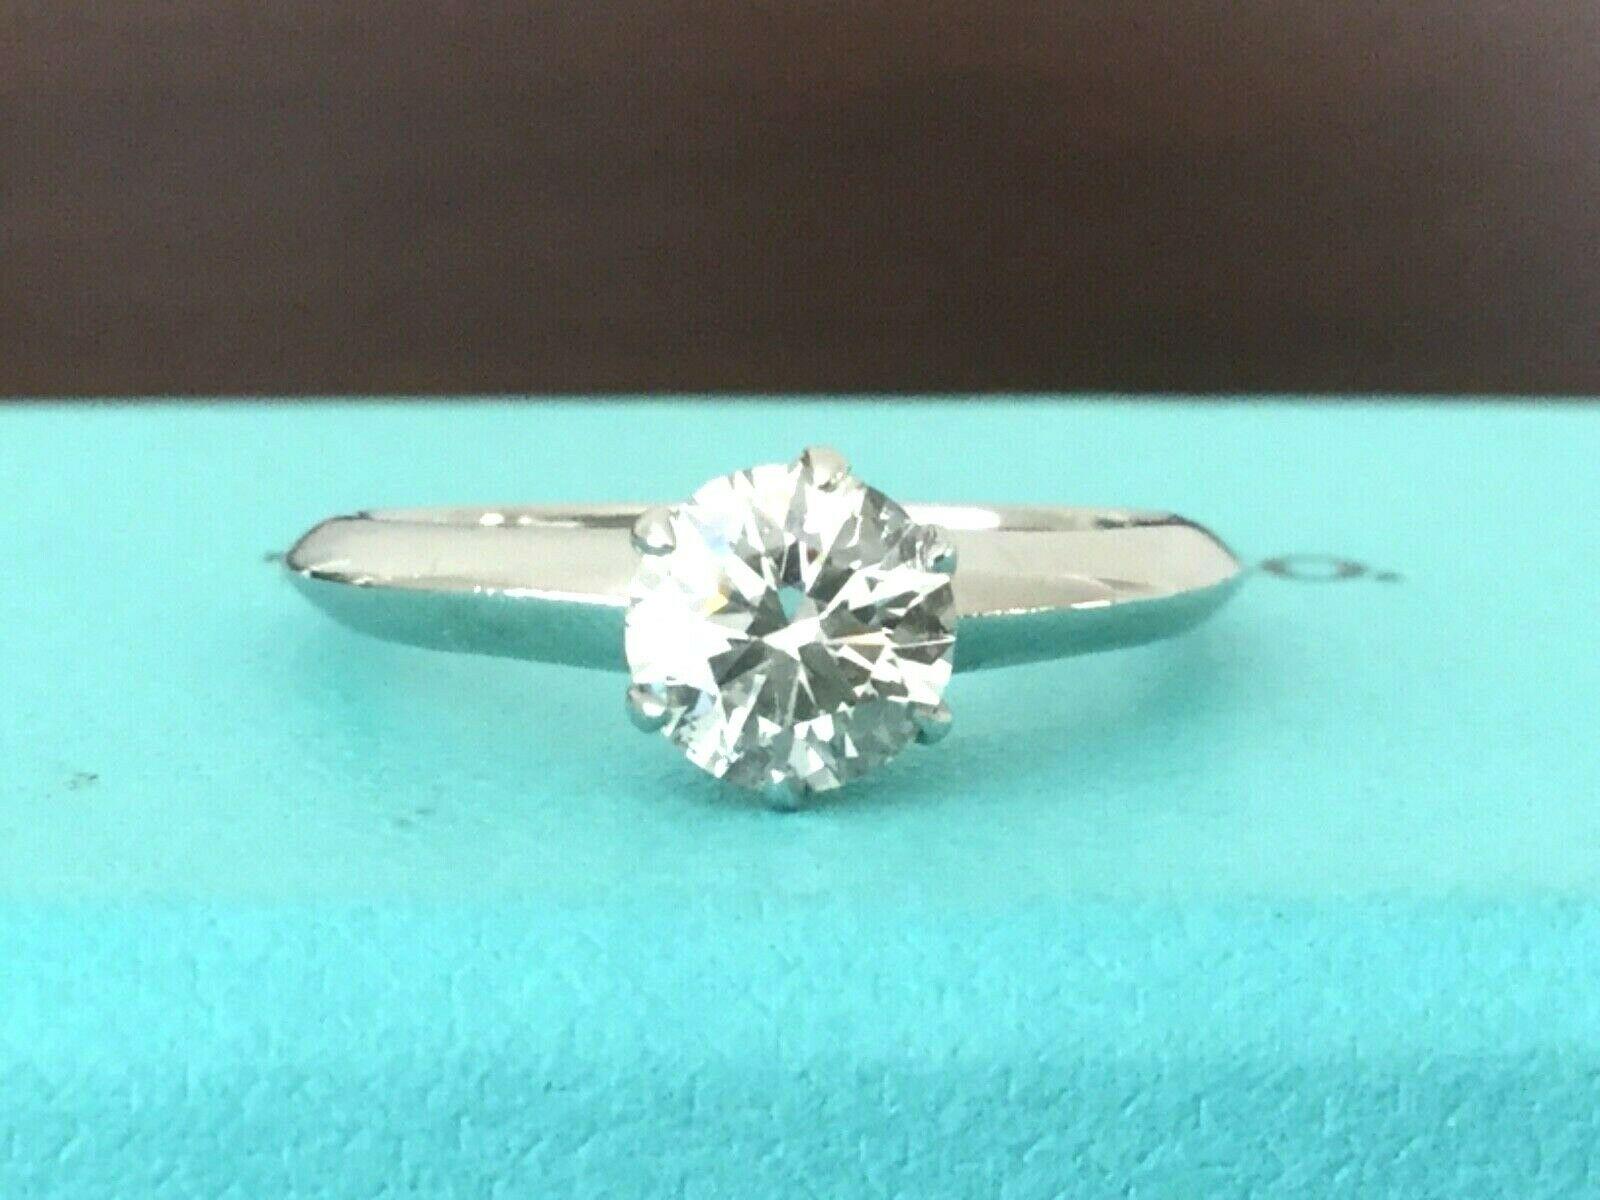 Being offered for your consideration is a like new Tiffany & Co Platinum and Diamond .77 carat natural round engagement ring set in the classic 6 prong setting.  This stunning ring is a TRUE INVESTMENT grade diamond ring - being F Color, VS2 Clarity